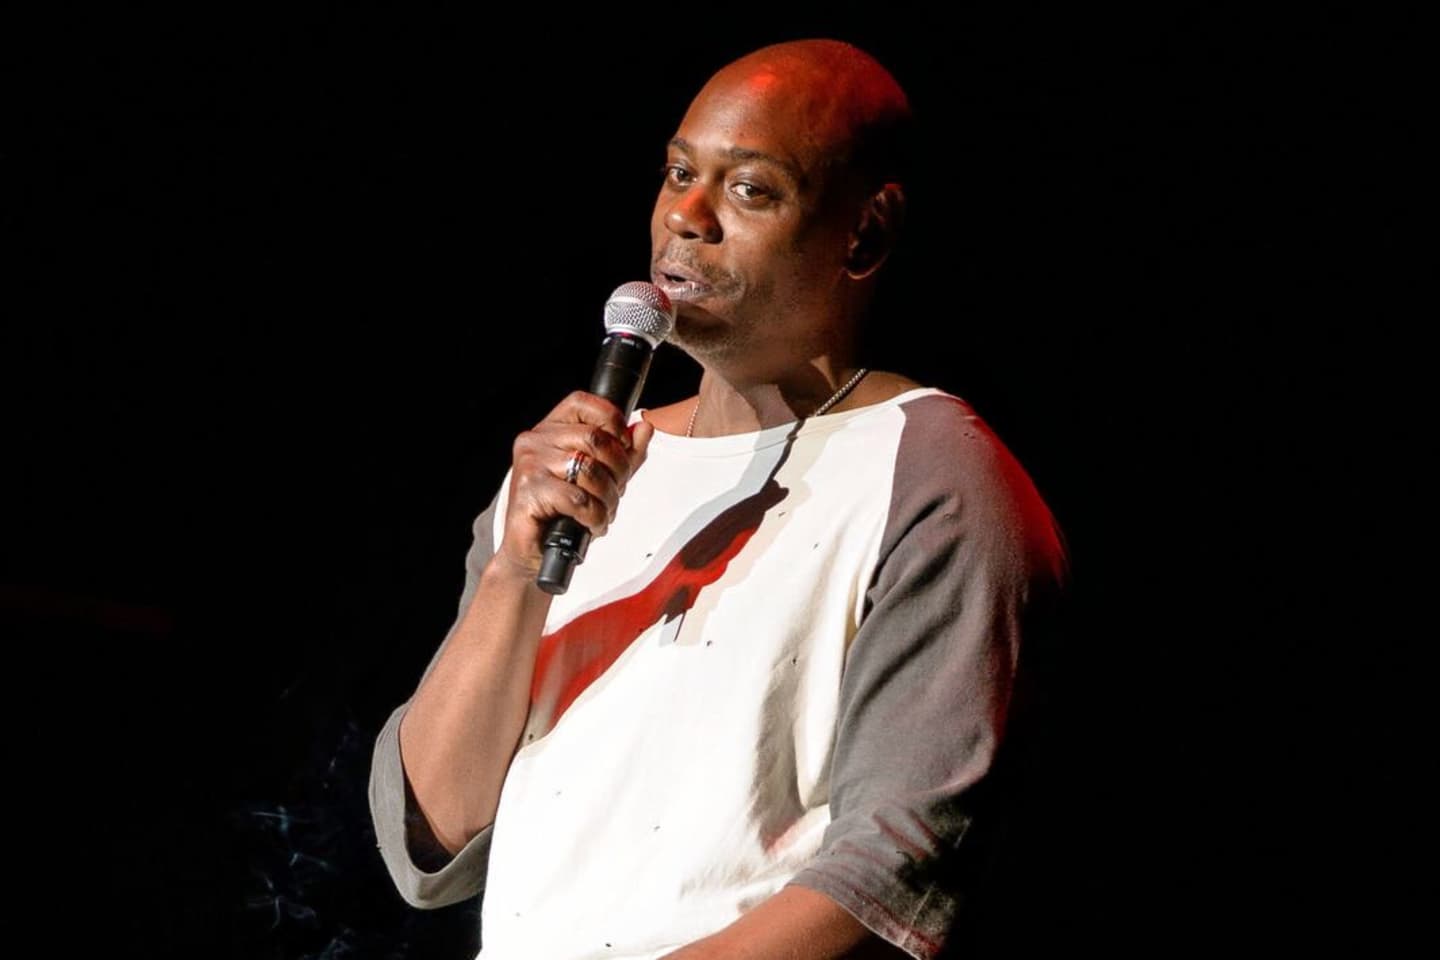 Dave Chappelle Tickets Buy or Sell Tickets for Dave Chappelle Tour